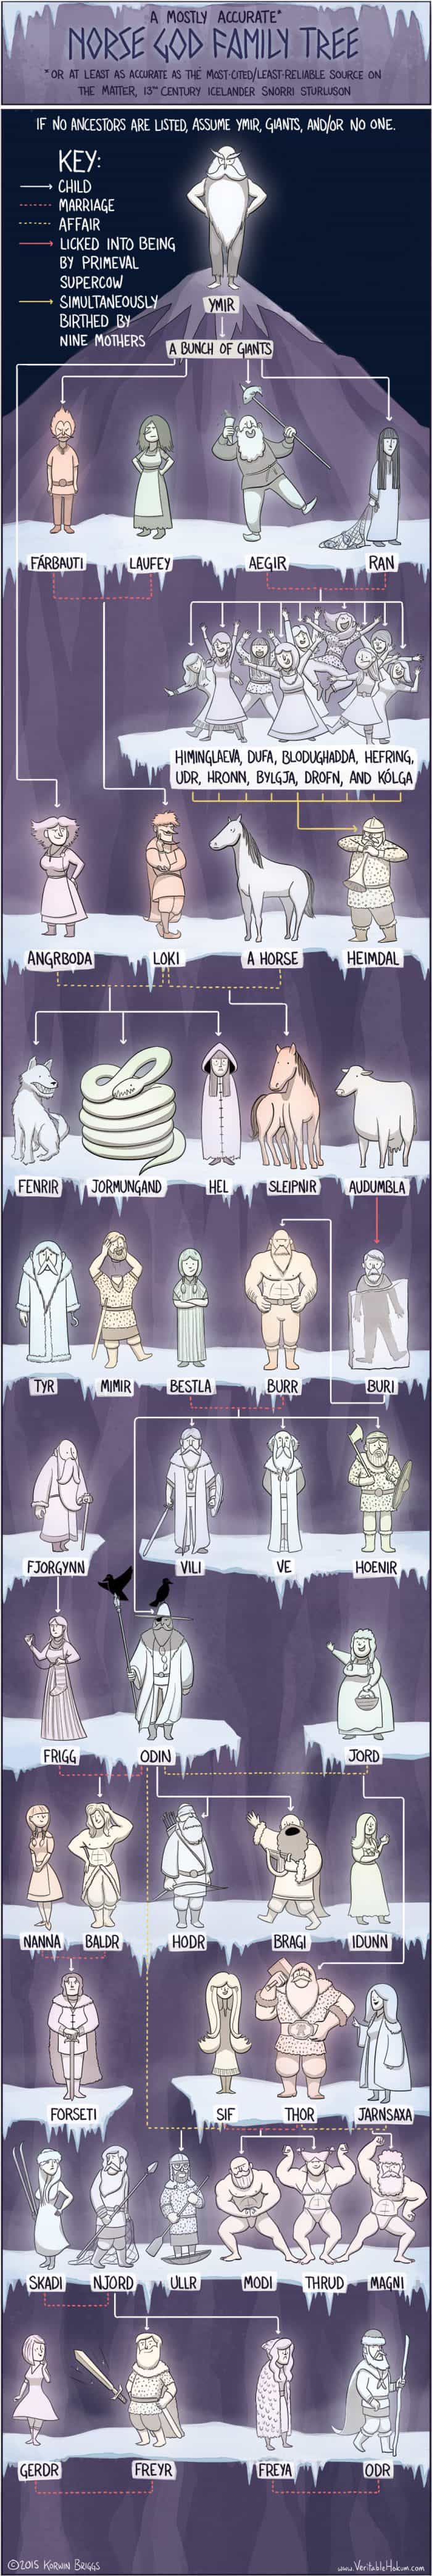 Infographic showing Norse god family tree in a funny and cartoony art style